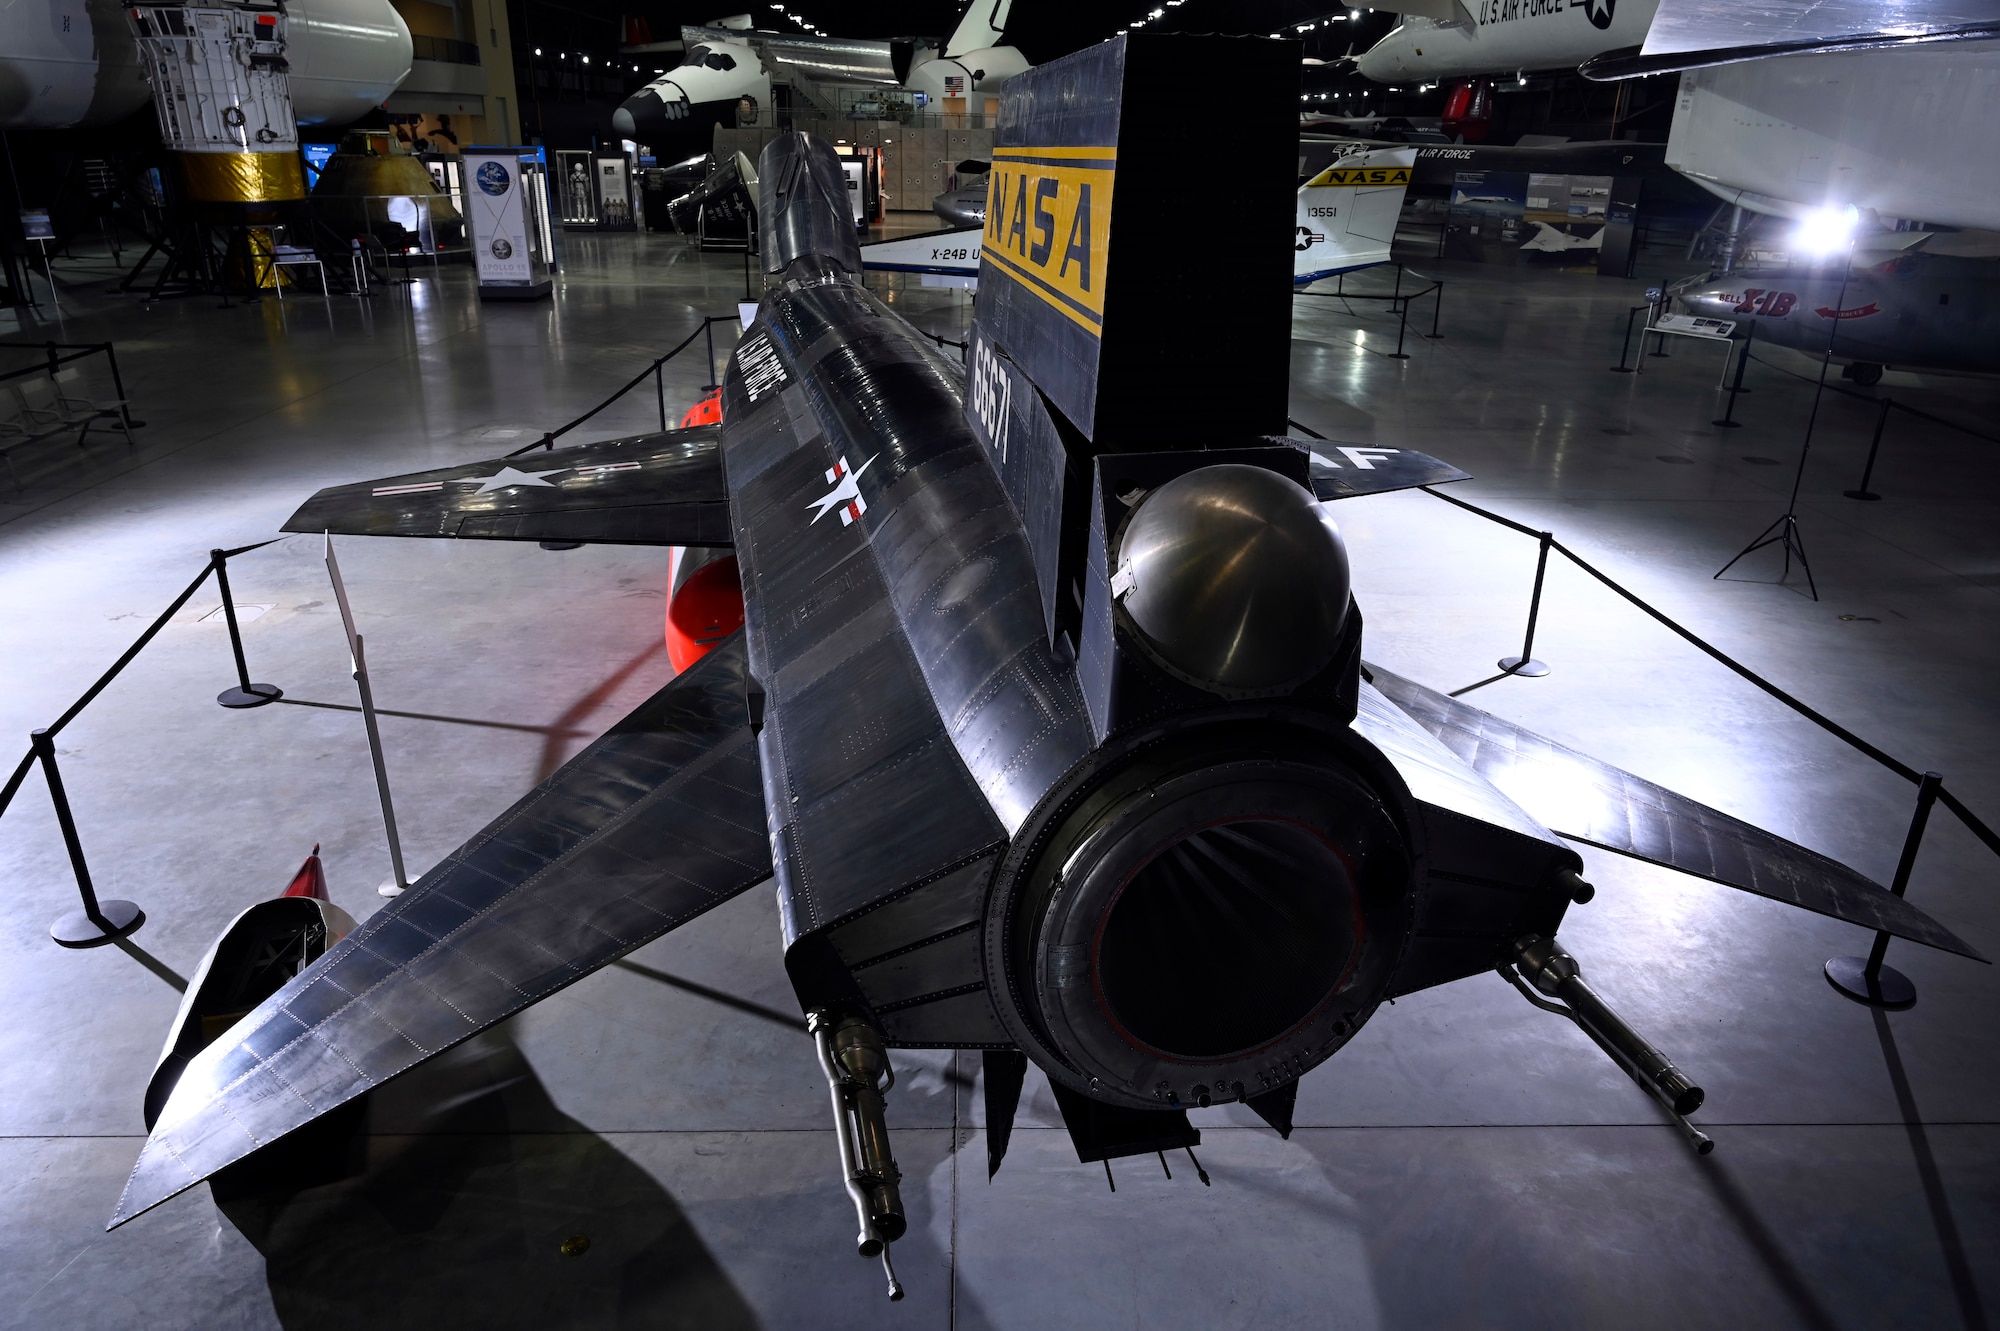 North American X-15A-2 on display in the National Museum of the U.S. Air Force Space Gallery.